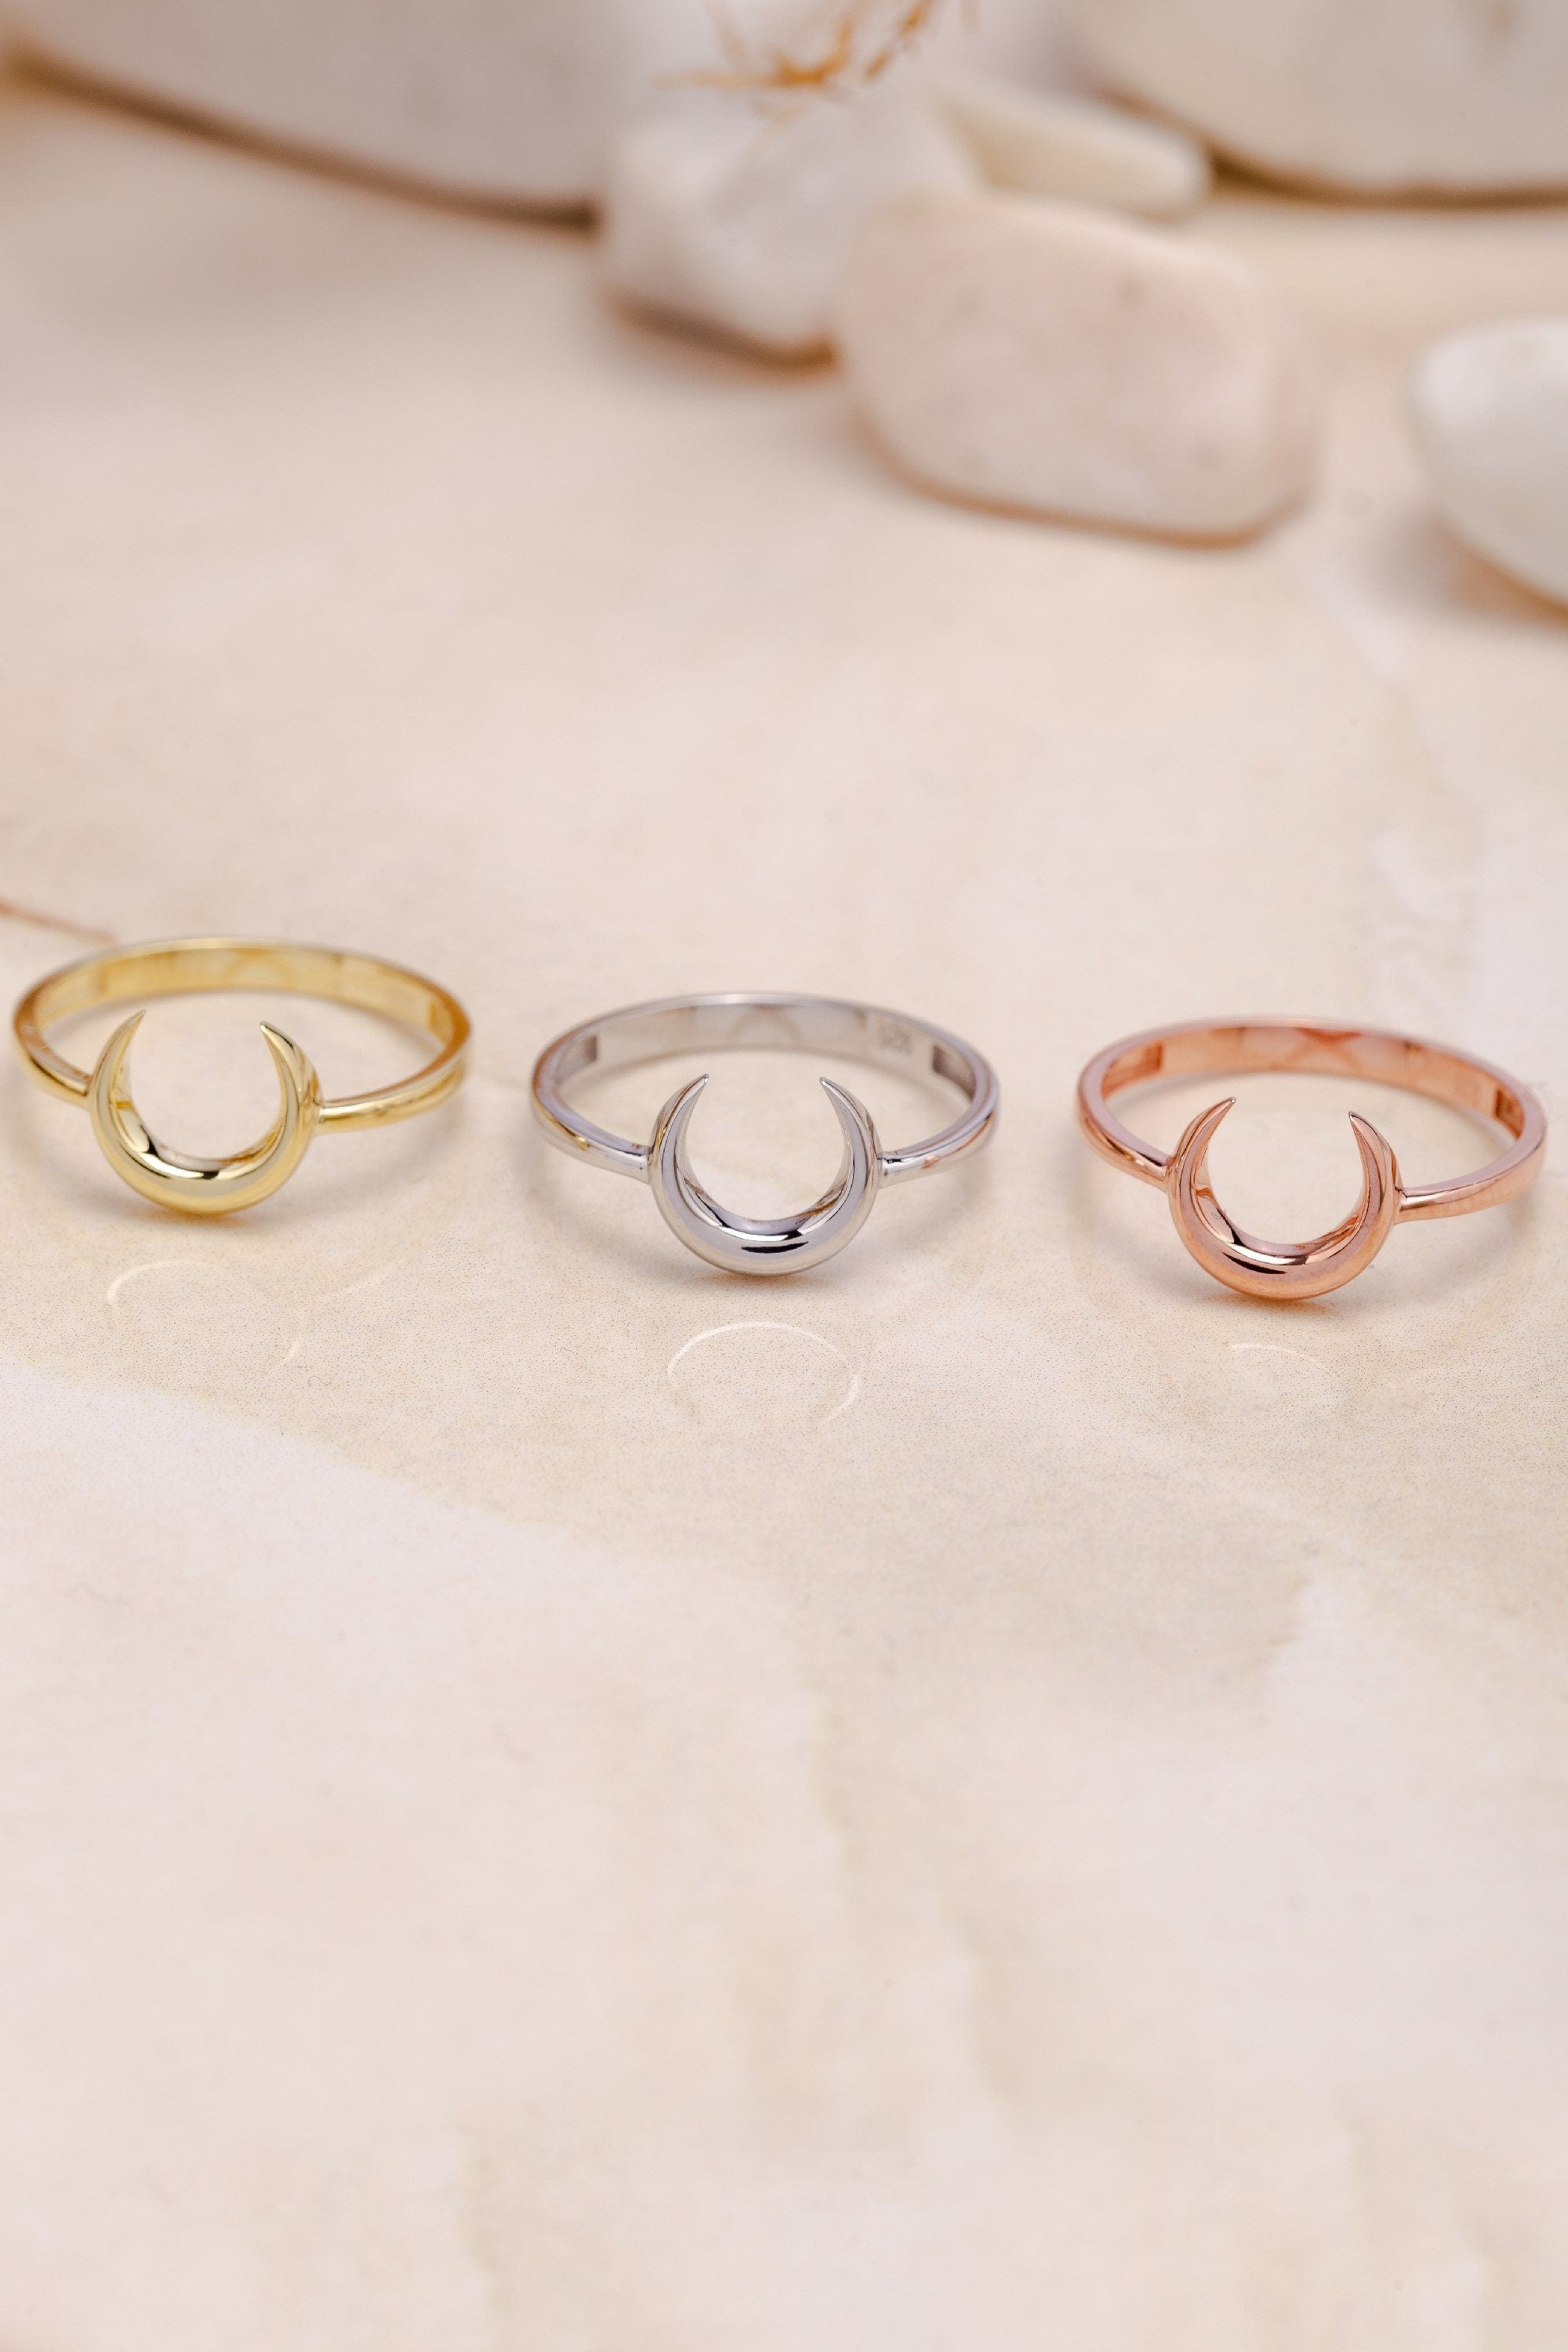 Moon Ring Silver, Open Moon Ring, Tiny Moon Ring For Women, 925 Gold Crescent Moon Rings, Gift For Mother Day, Mother Day Jewelry